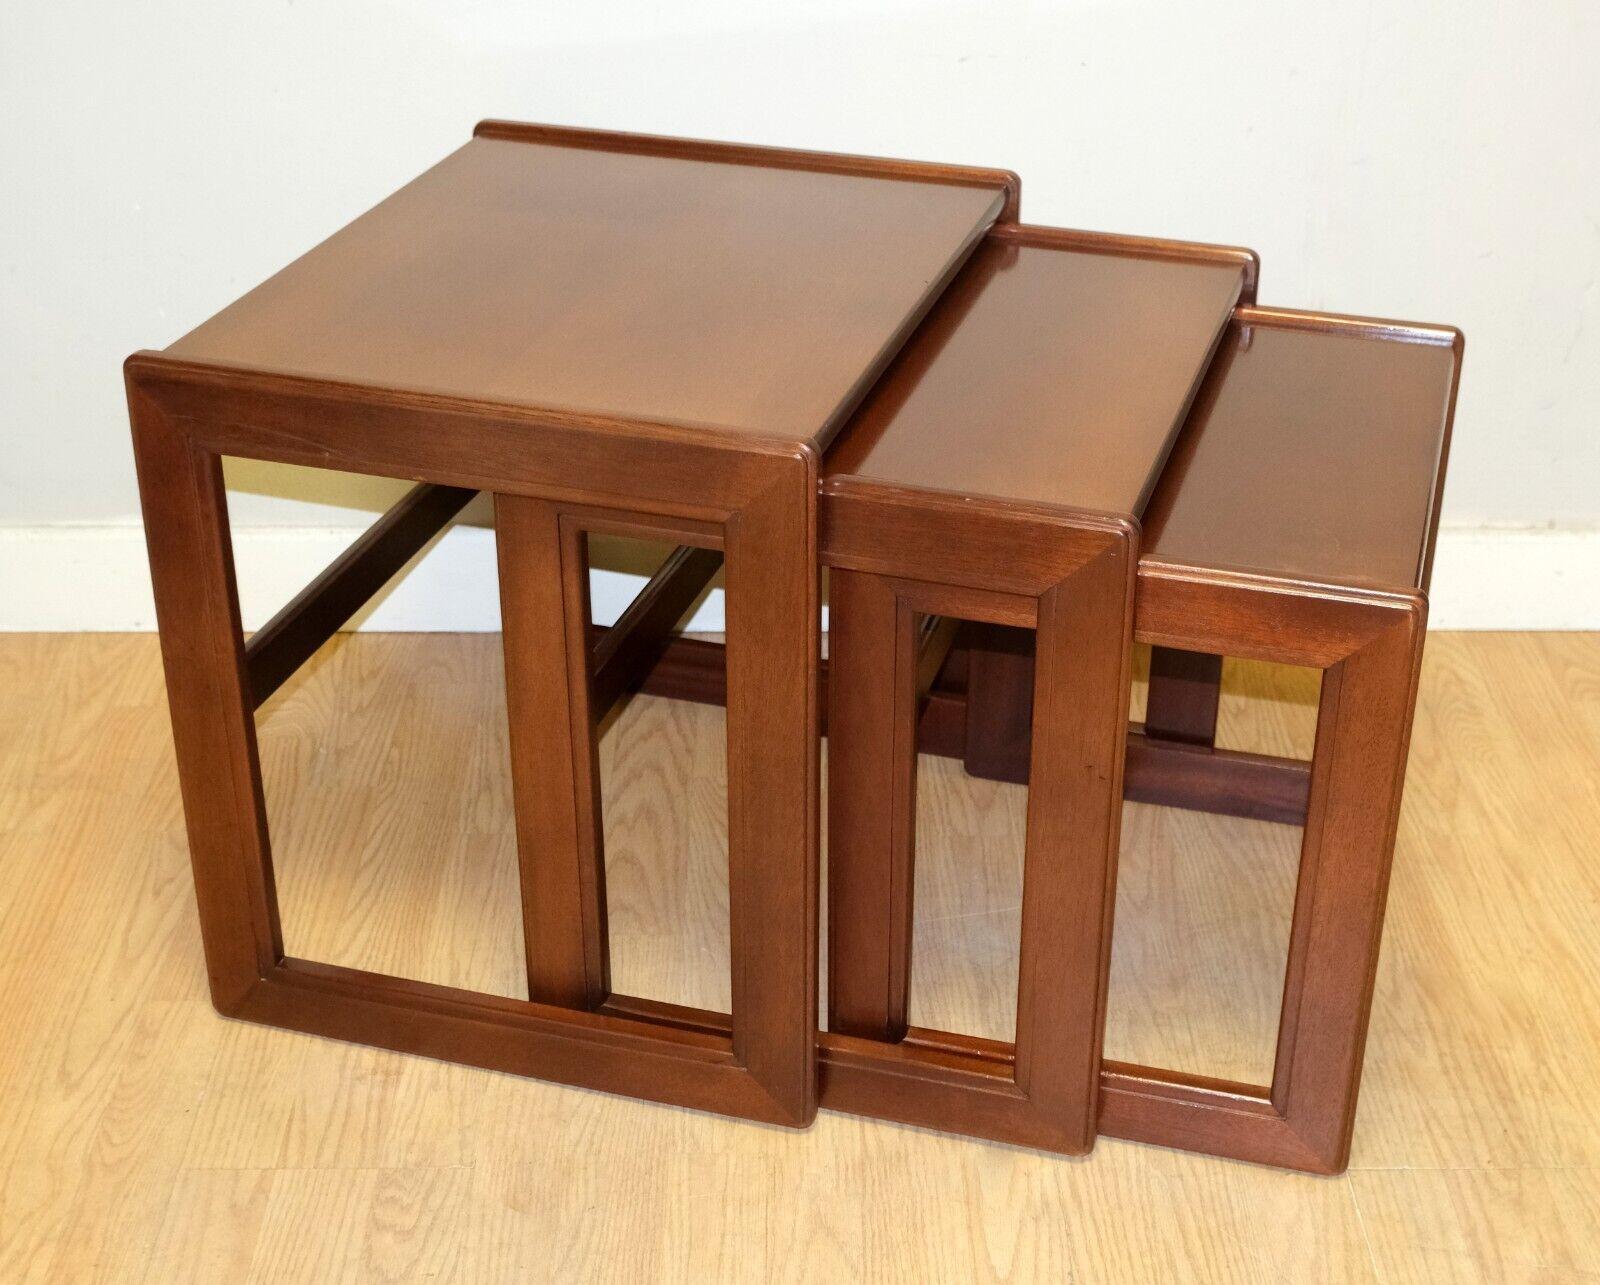 Hand-Crafted LOVELY G PLAN ART DECO BRoWN TEAK NEST OF TABLES SET OF 3 For Sale